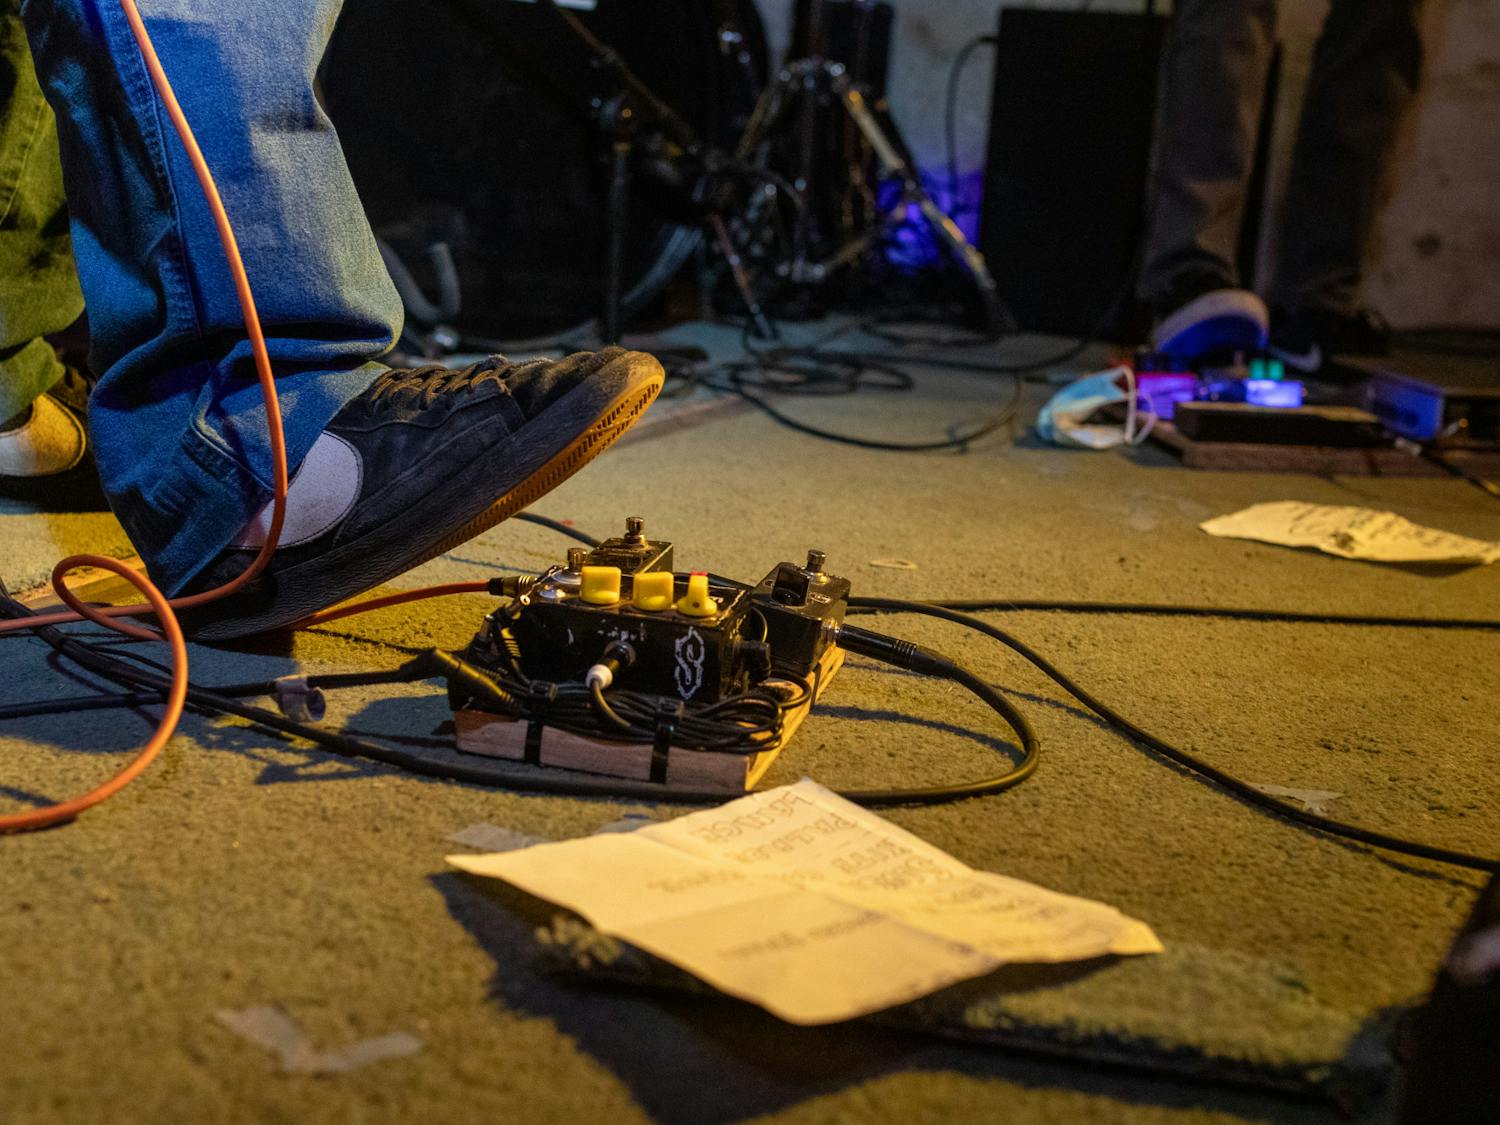 Guitar pedals, cables, and setlists litter the makeshift pallet stage at The Lavender Room.